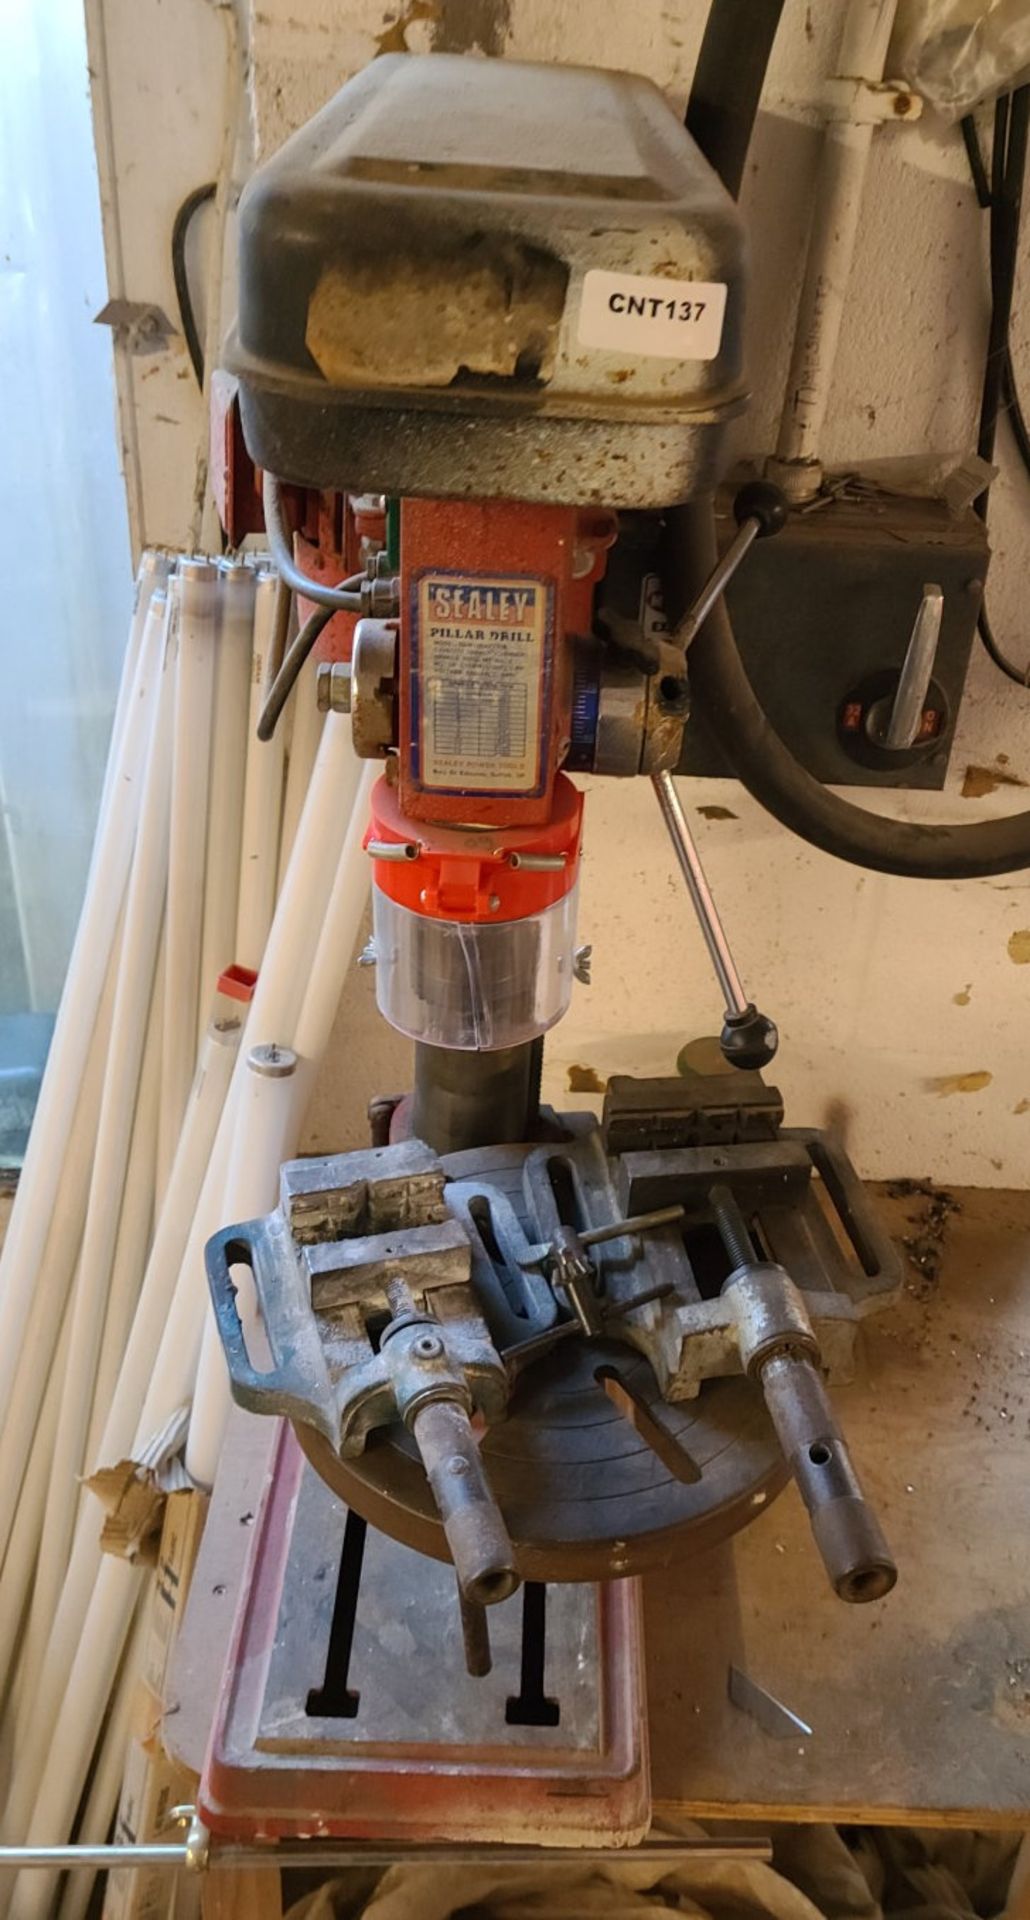 1 x Sealey Pillar Drill - Ref: CNT137 - CL846 - Location: Oxford OX2This lot is from a recently